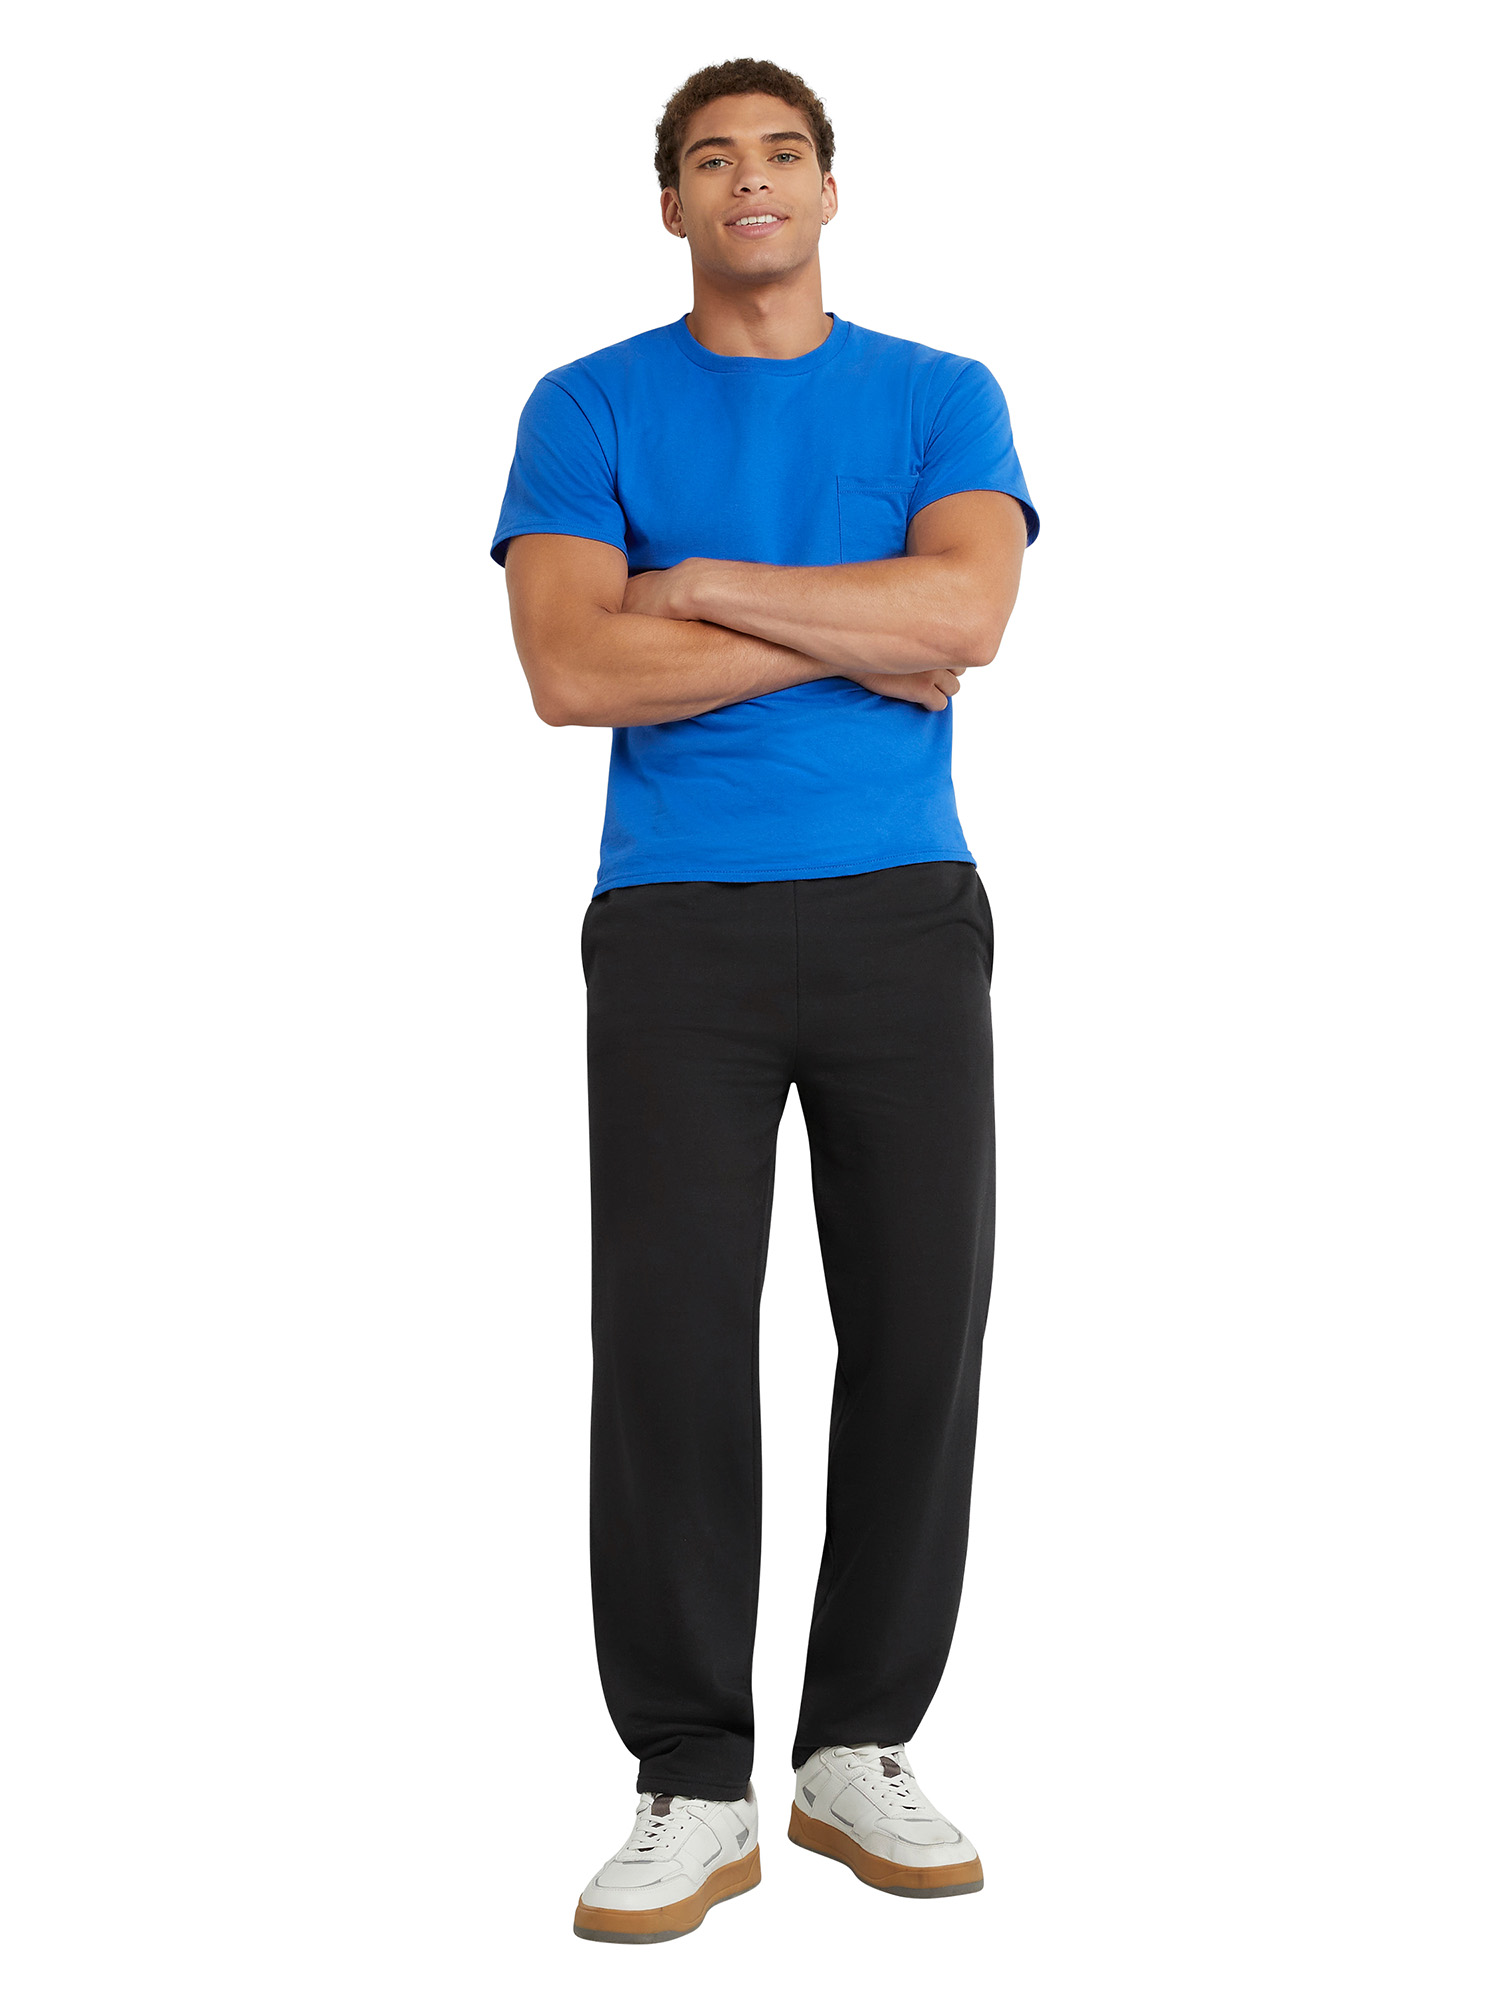 Hanes Men's and Big Men's EcoSmart Fleece Sweatpants with Pockets, up to Sizes 3XL - image 2 of 7